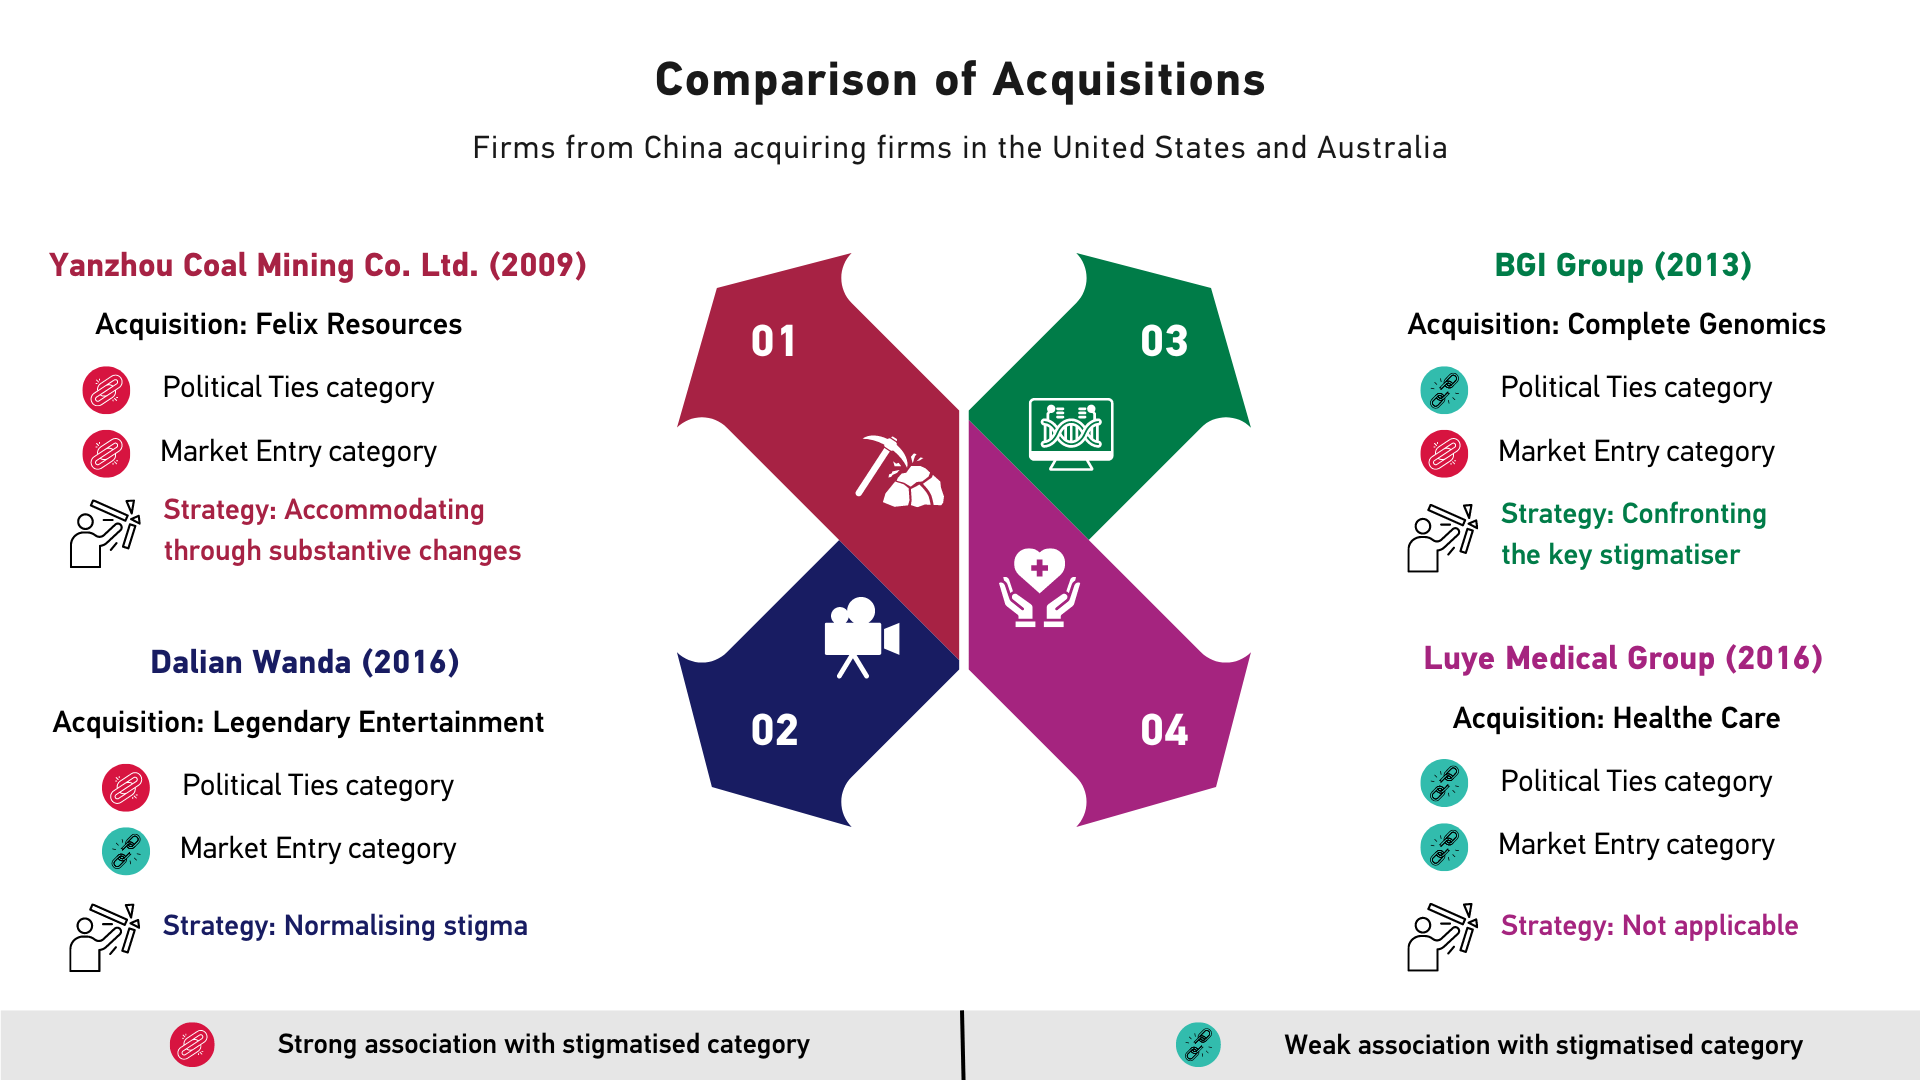 Illustration of the comparison of acquisitions by four firms from China